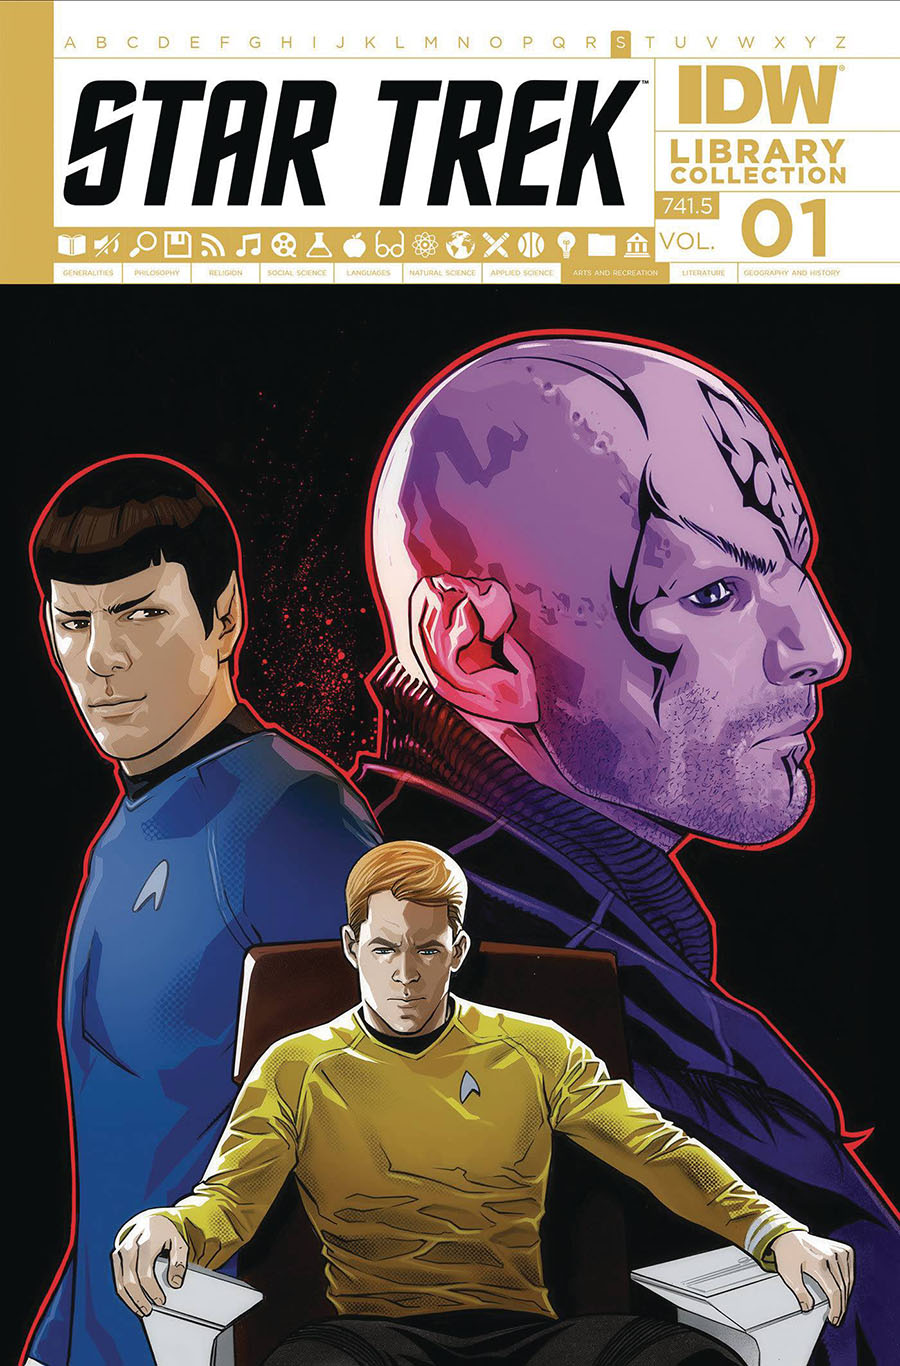 Star Trek Library Collection Vol 1 TP